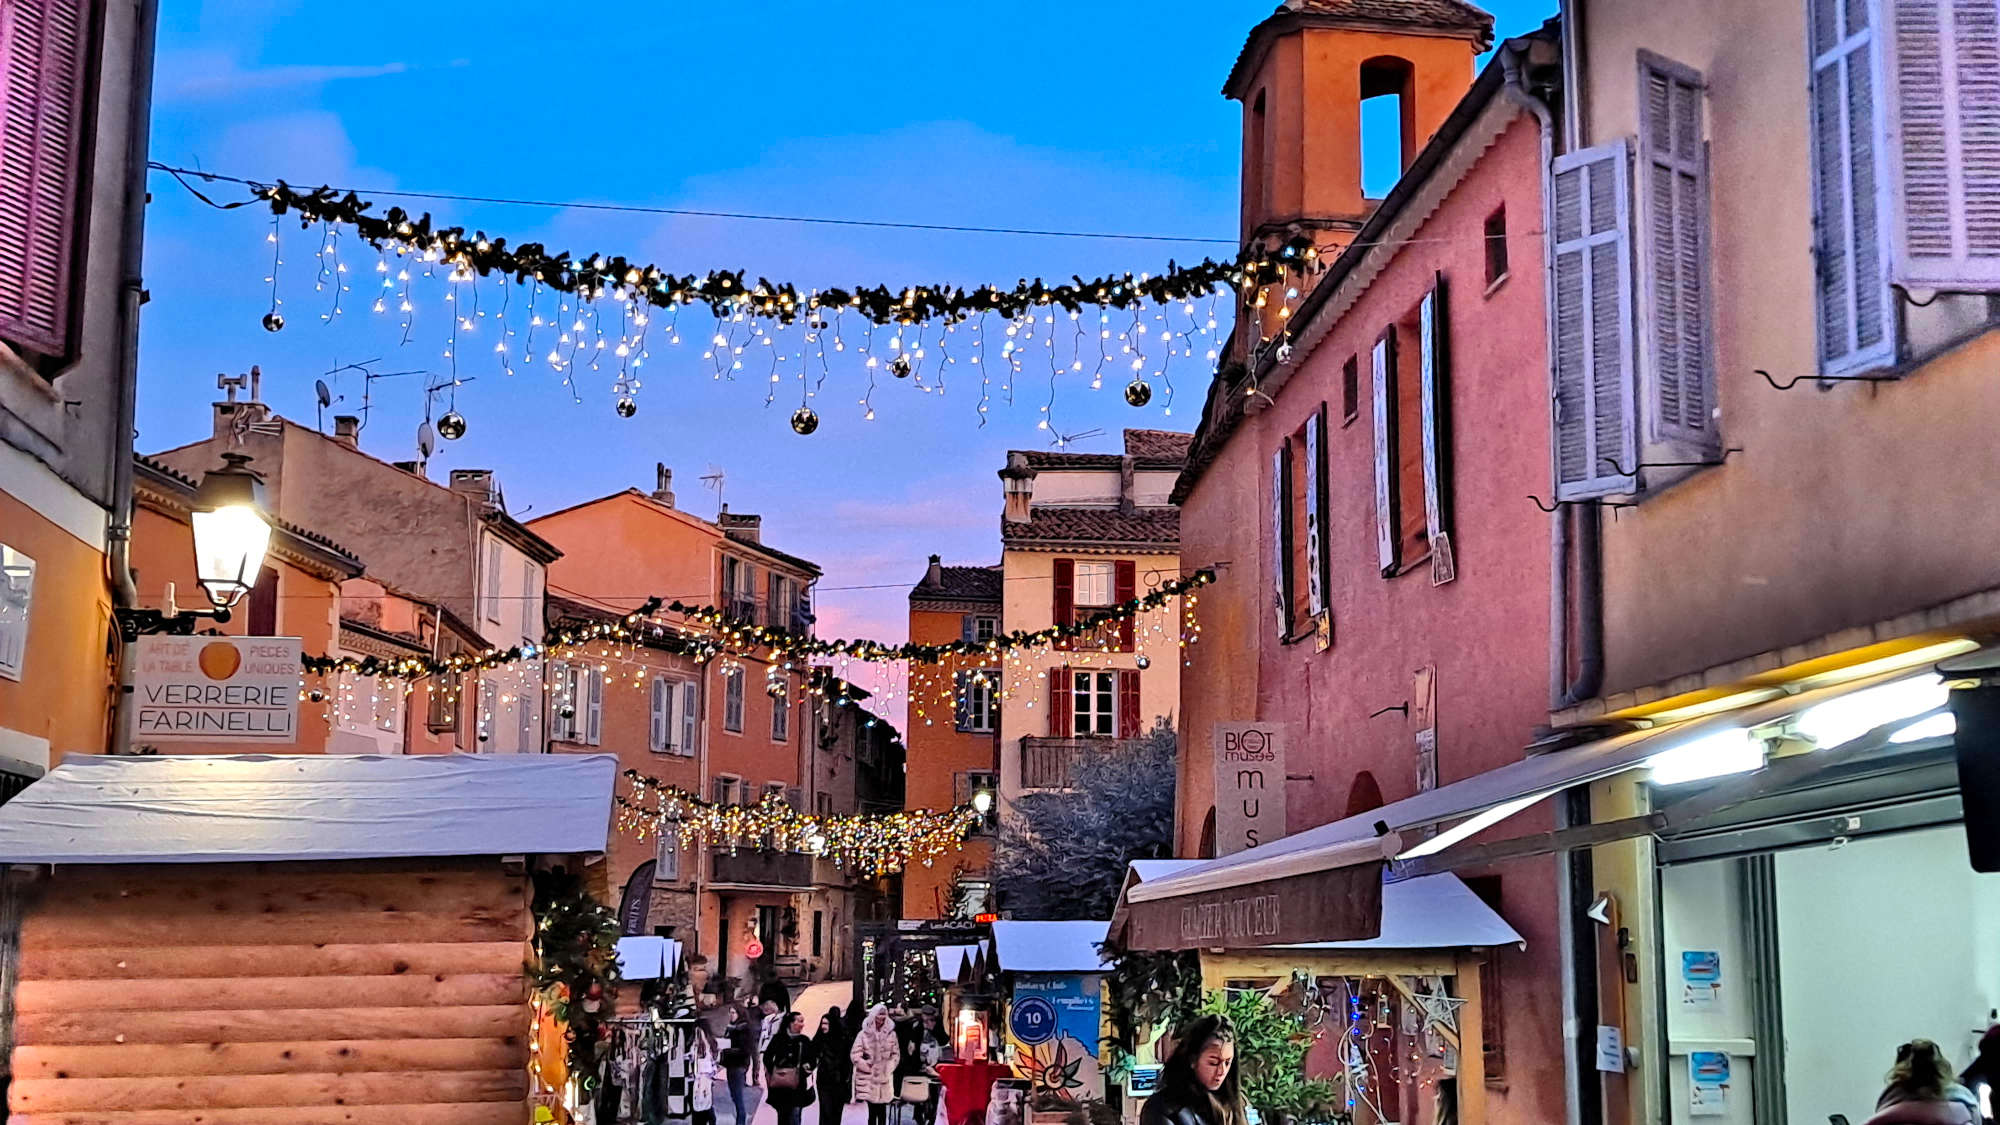 During your vacation on the Côte d’Azur, discover and visit the pretty Provencal village of Biot.